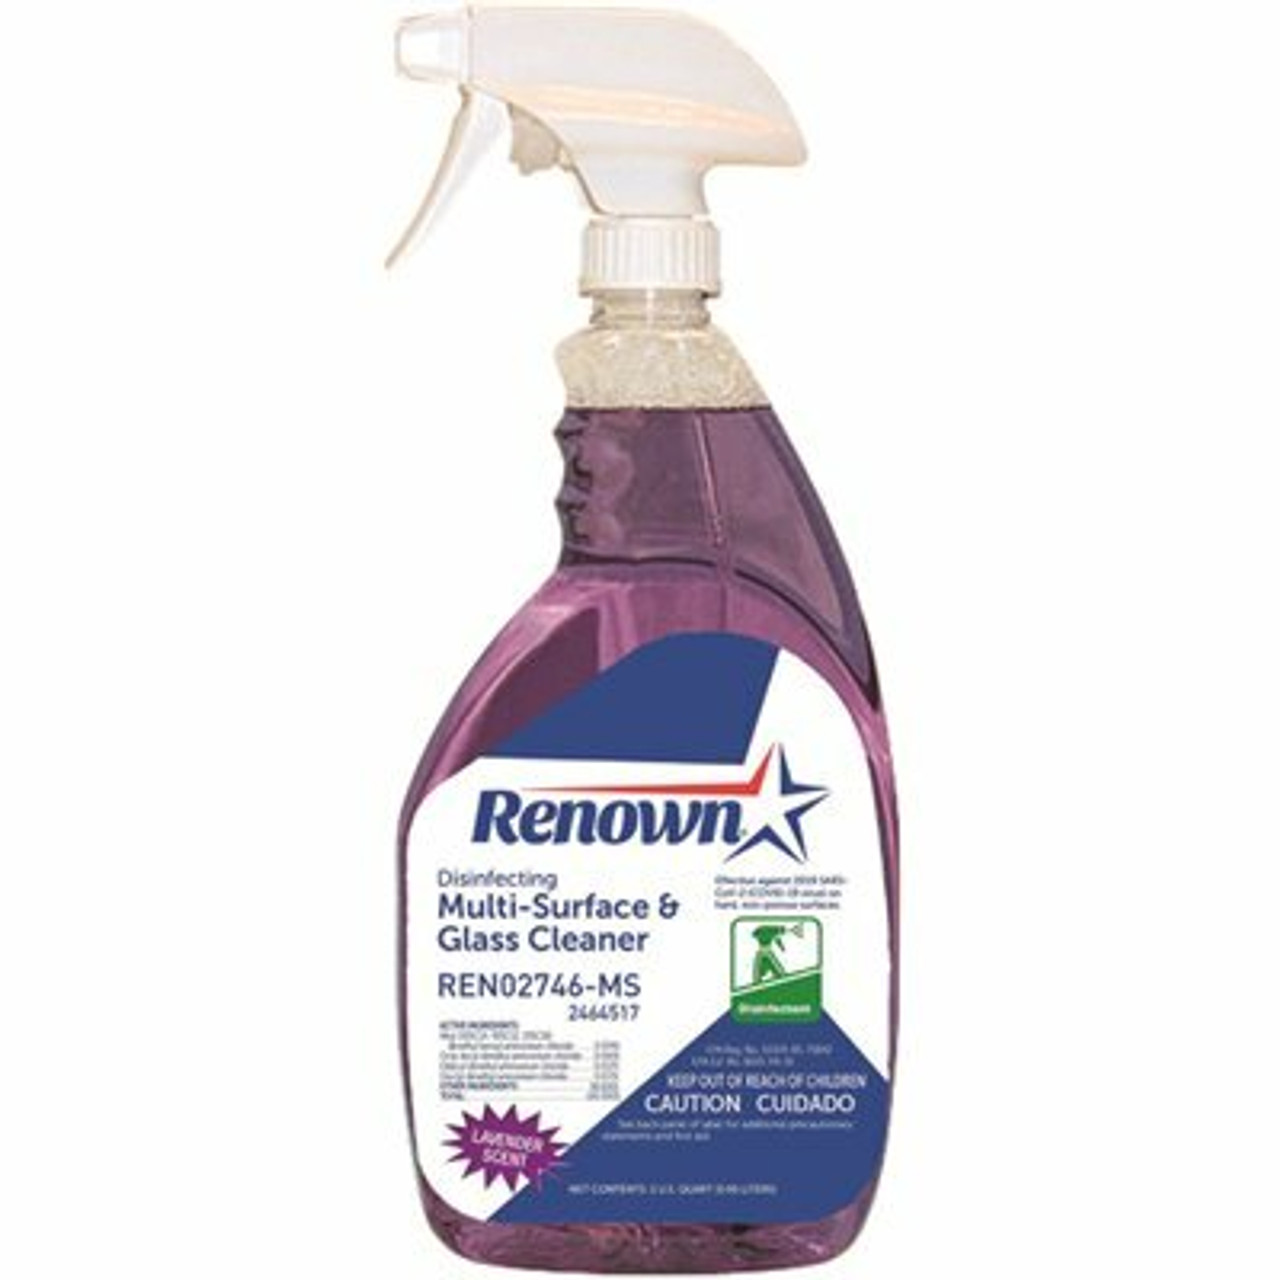 Renown 32 Oz. Disinfecting Multi-Surface & Glass Cleaner